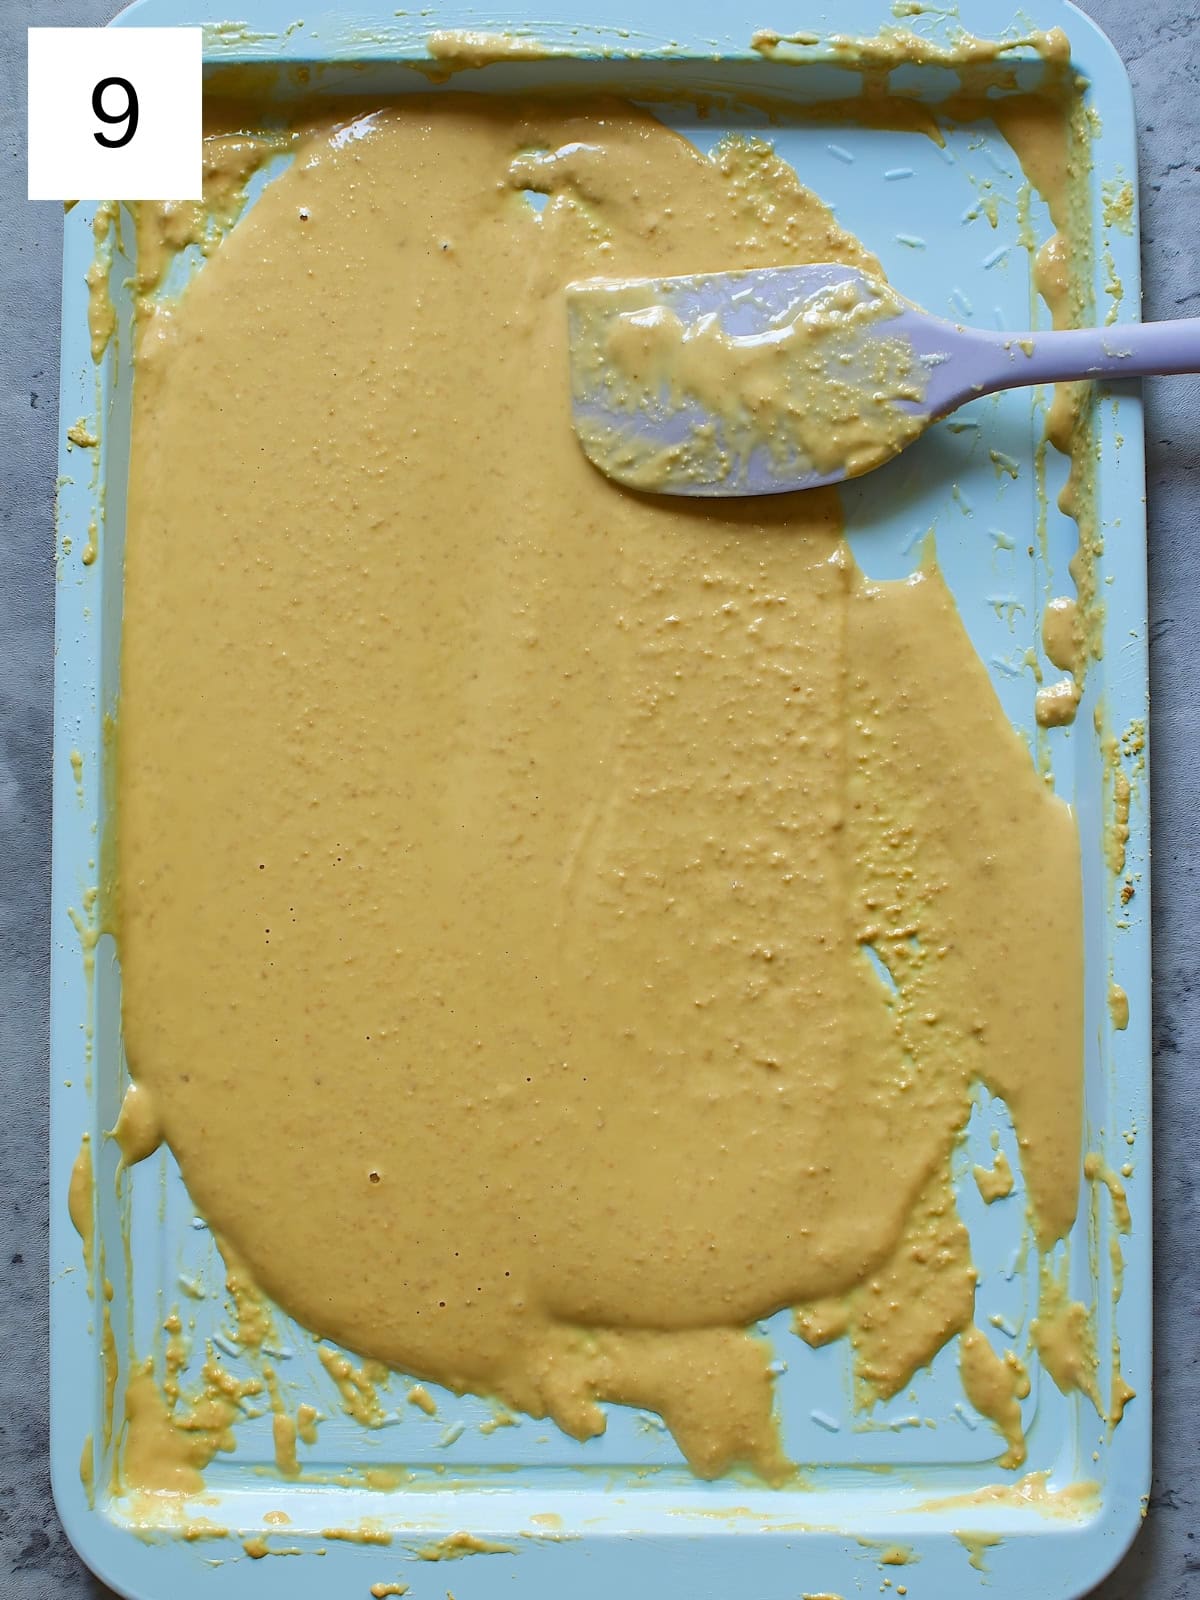 A baking spatula stirring melted white chocolate in a baking tray.